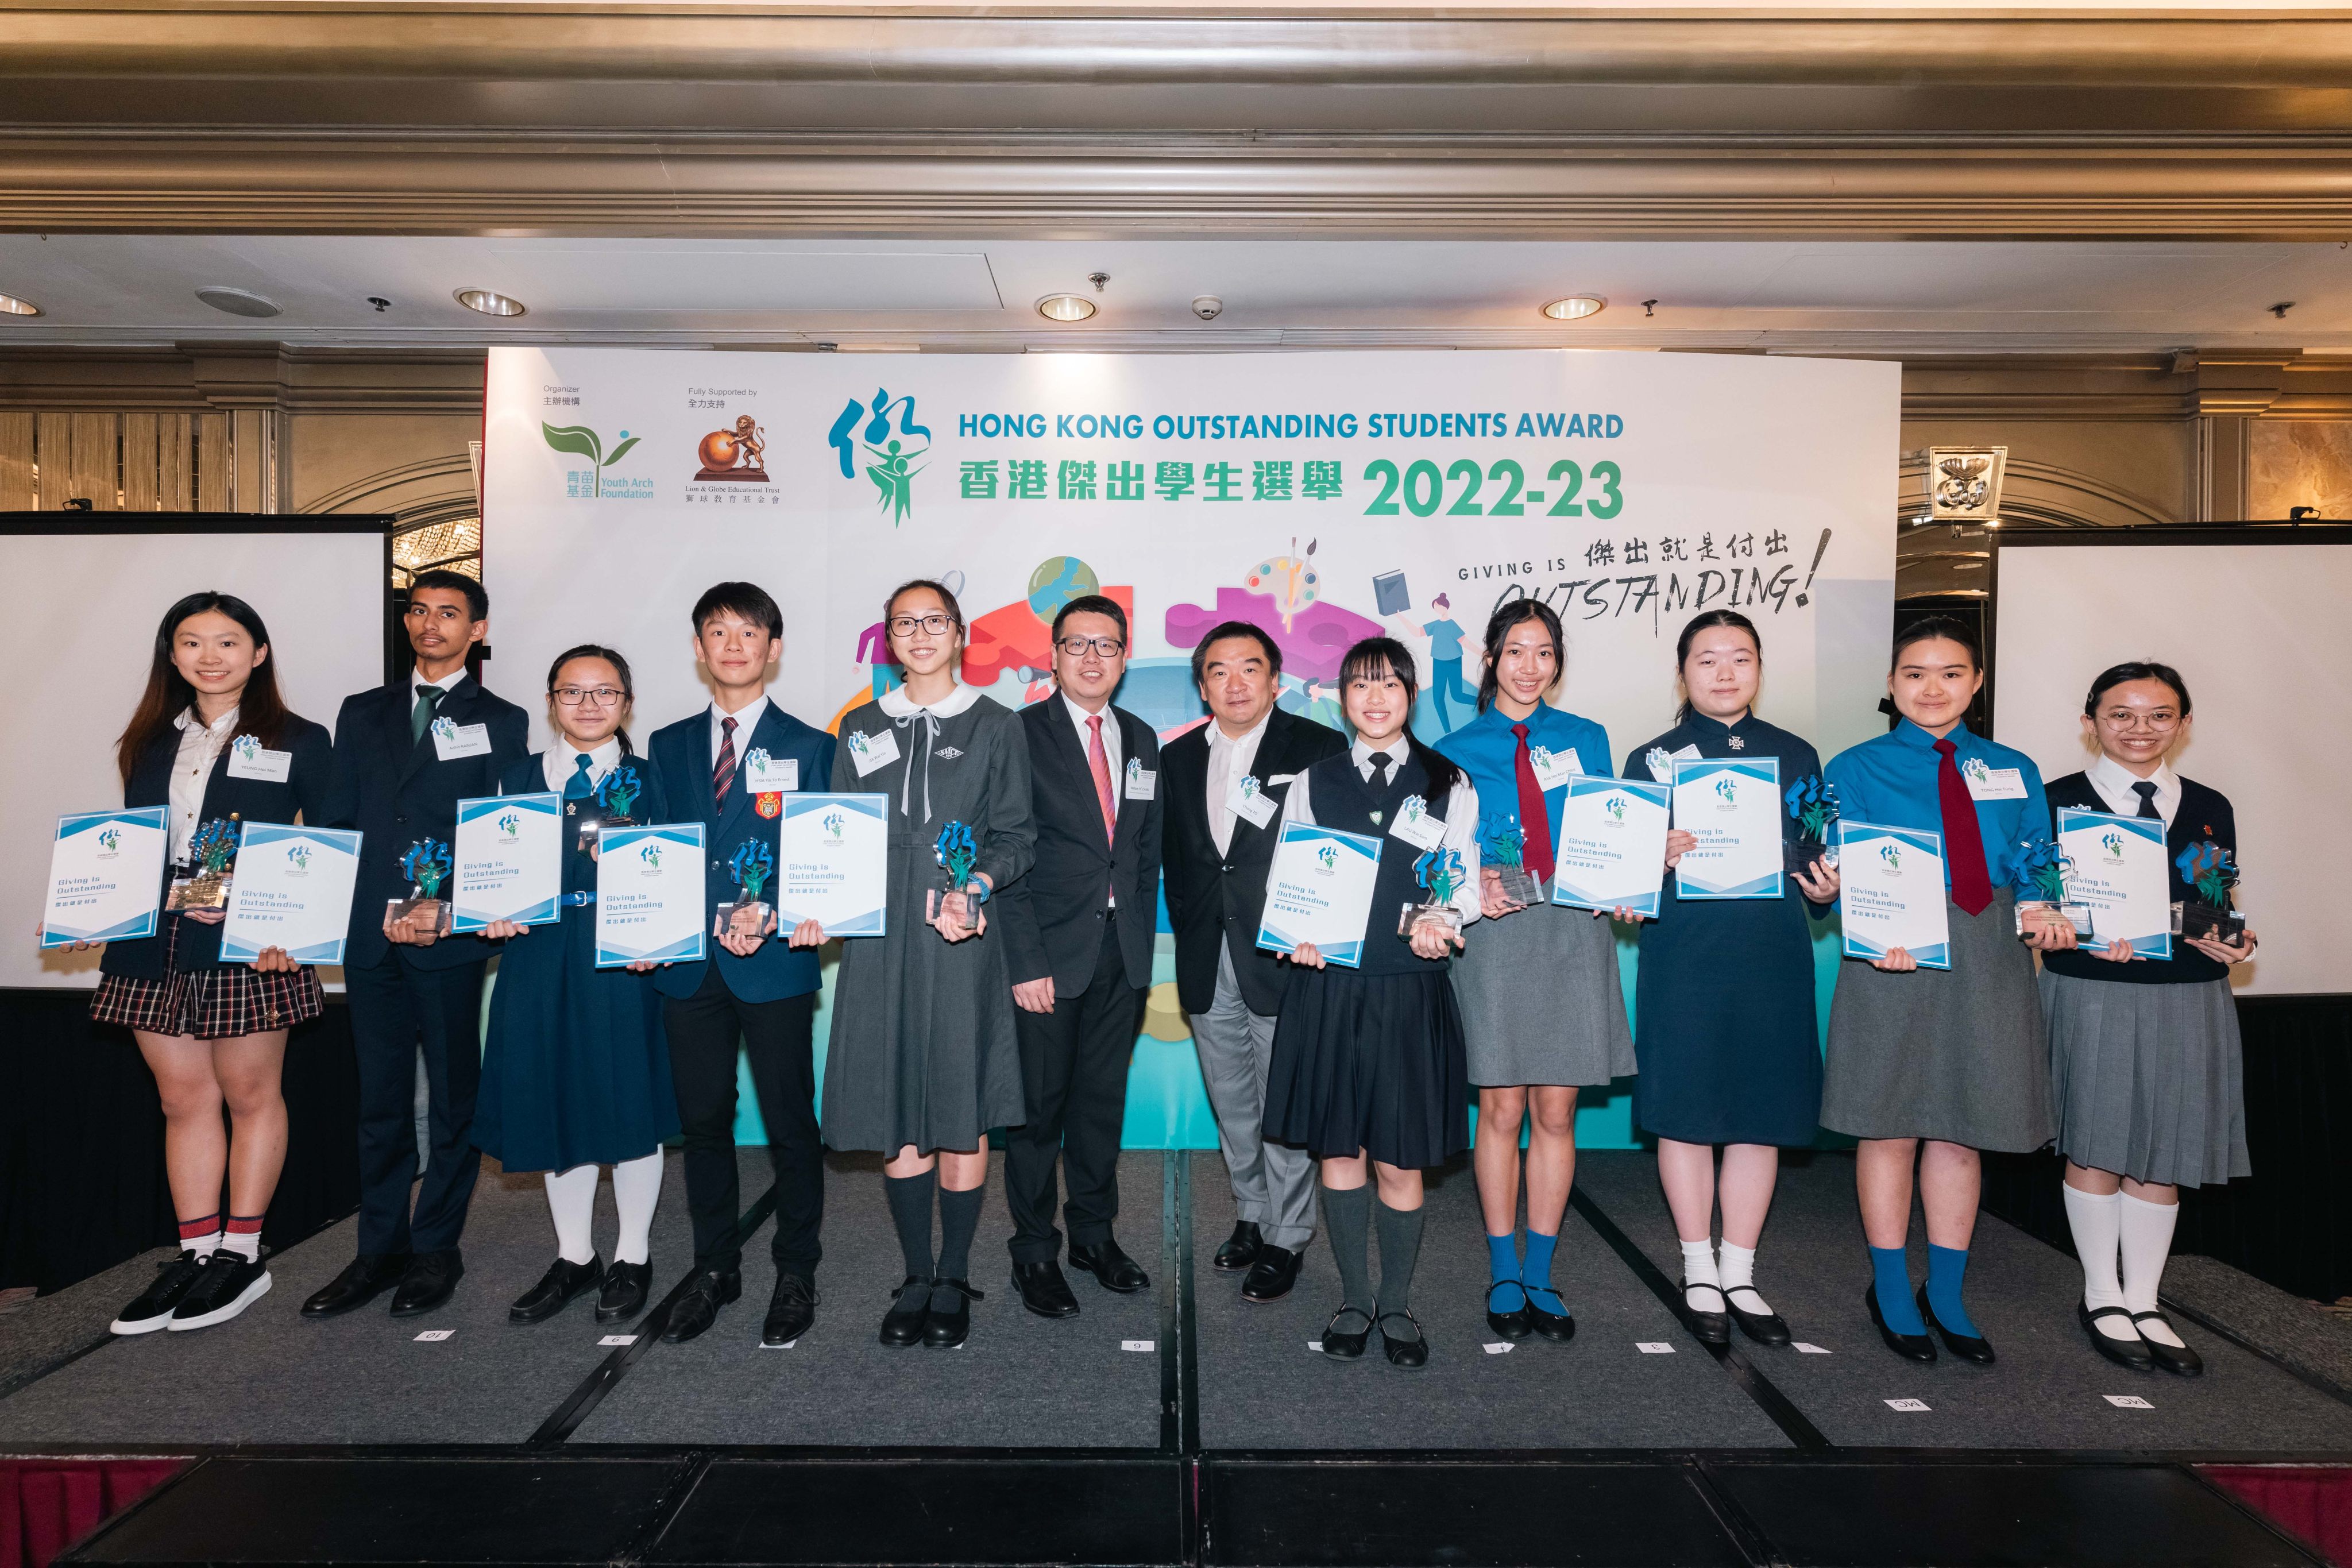 The 2022-23 winners of the Hong Kong Outstanding Students Awards. Photos: Handout